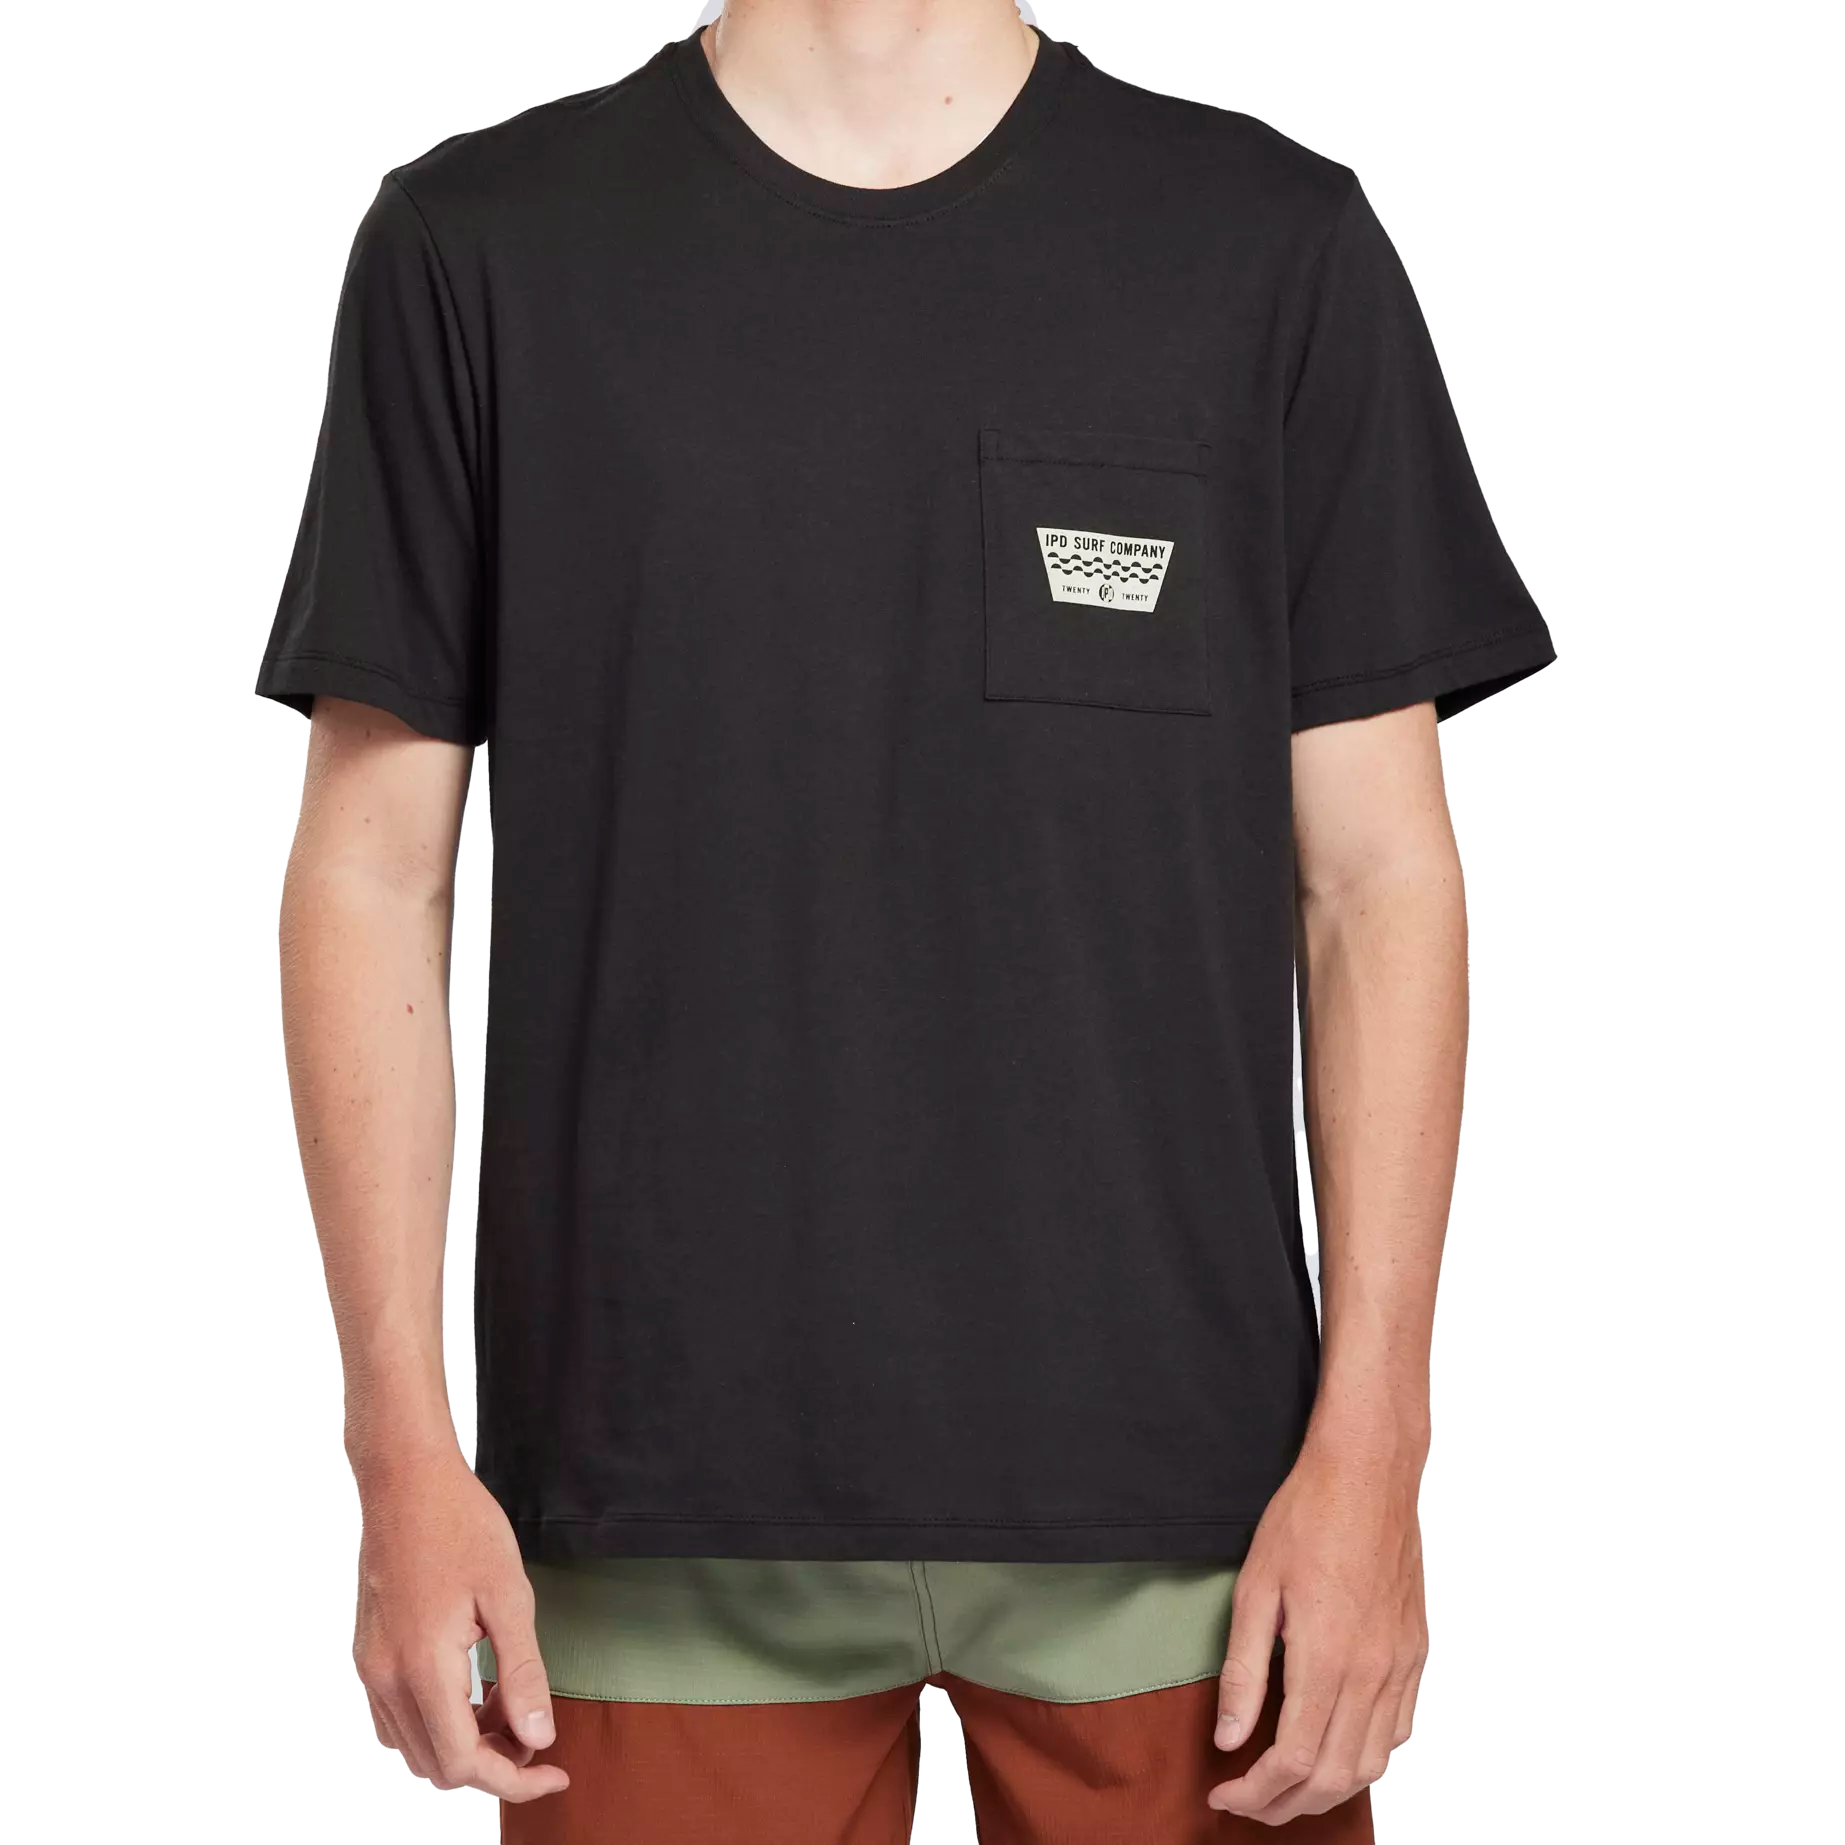 Black tee with I P D labeled front chest pocket.